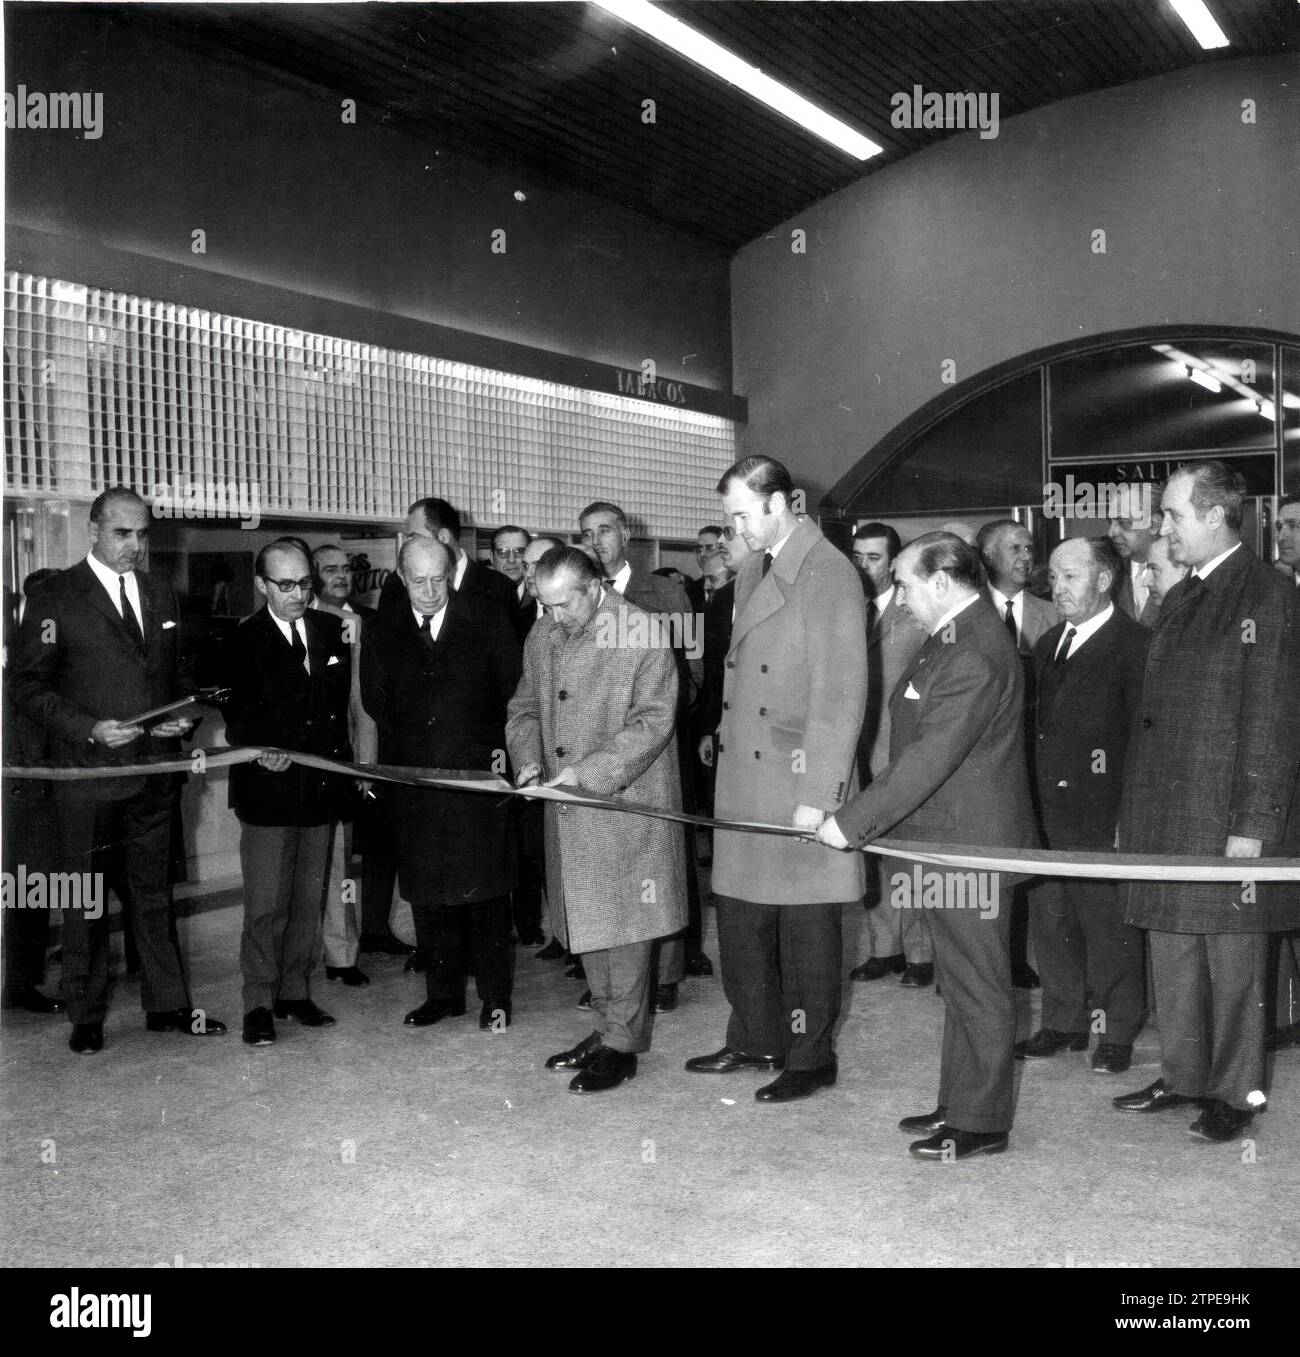 01/30/1969. Inauguration of the new lobby of the Recoletos stop, built by the Ministry of Public Works for Renfe Services, by the mayor of Madrid, Mr. Carlos Arias Navarro, accompanied by the general director of Land Transport, Mr. Santiago Cruylles, and the vice president of the board of directors of Renfe, Mr. Alfredo Moreno, among other personalities. Credit: Album / Archivo ABC / Manuel Sanz Bermejo Stock Photo